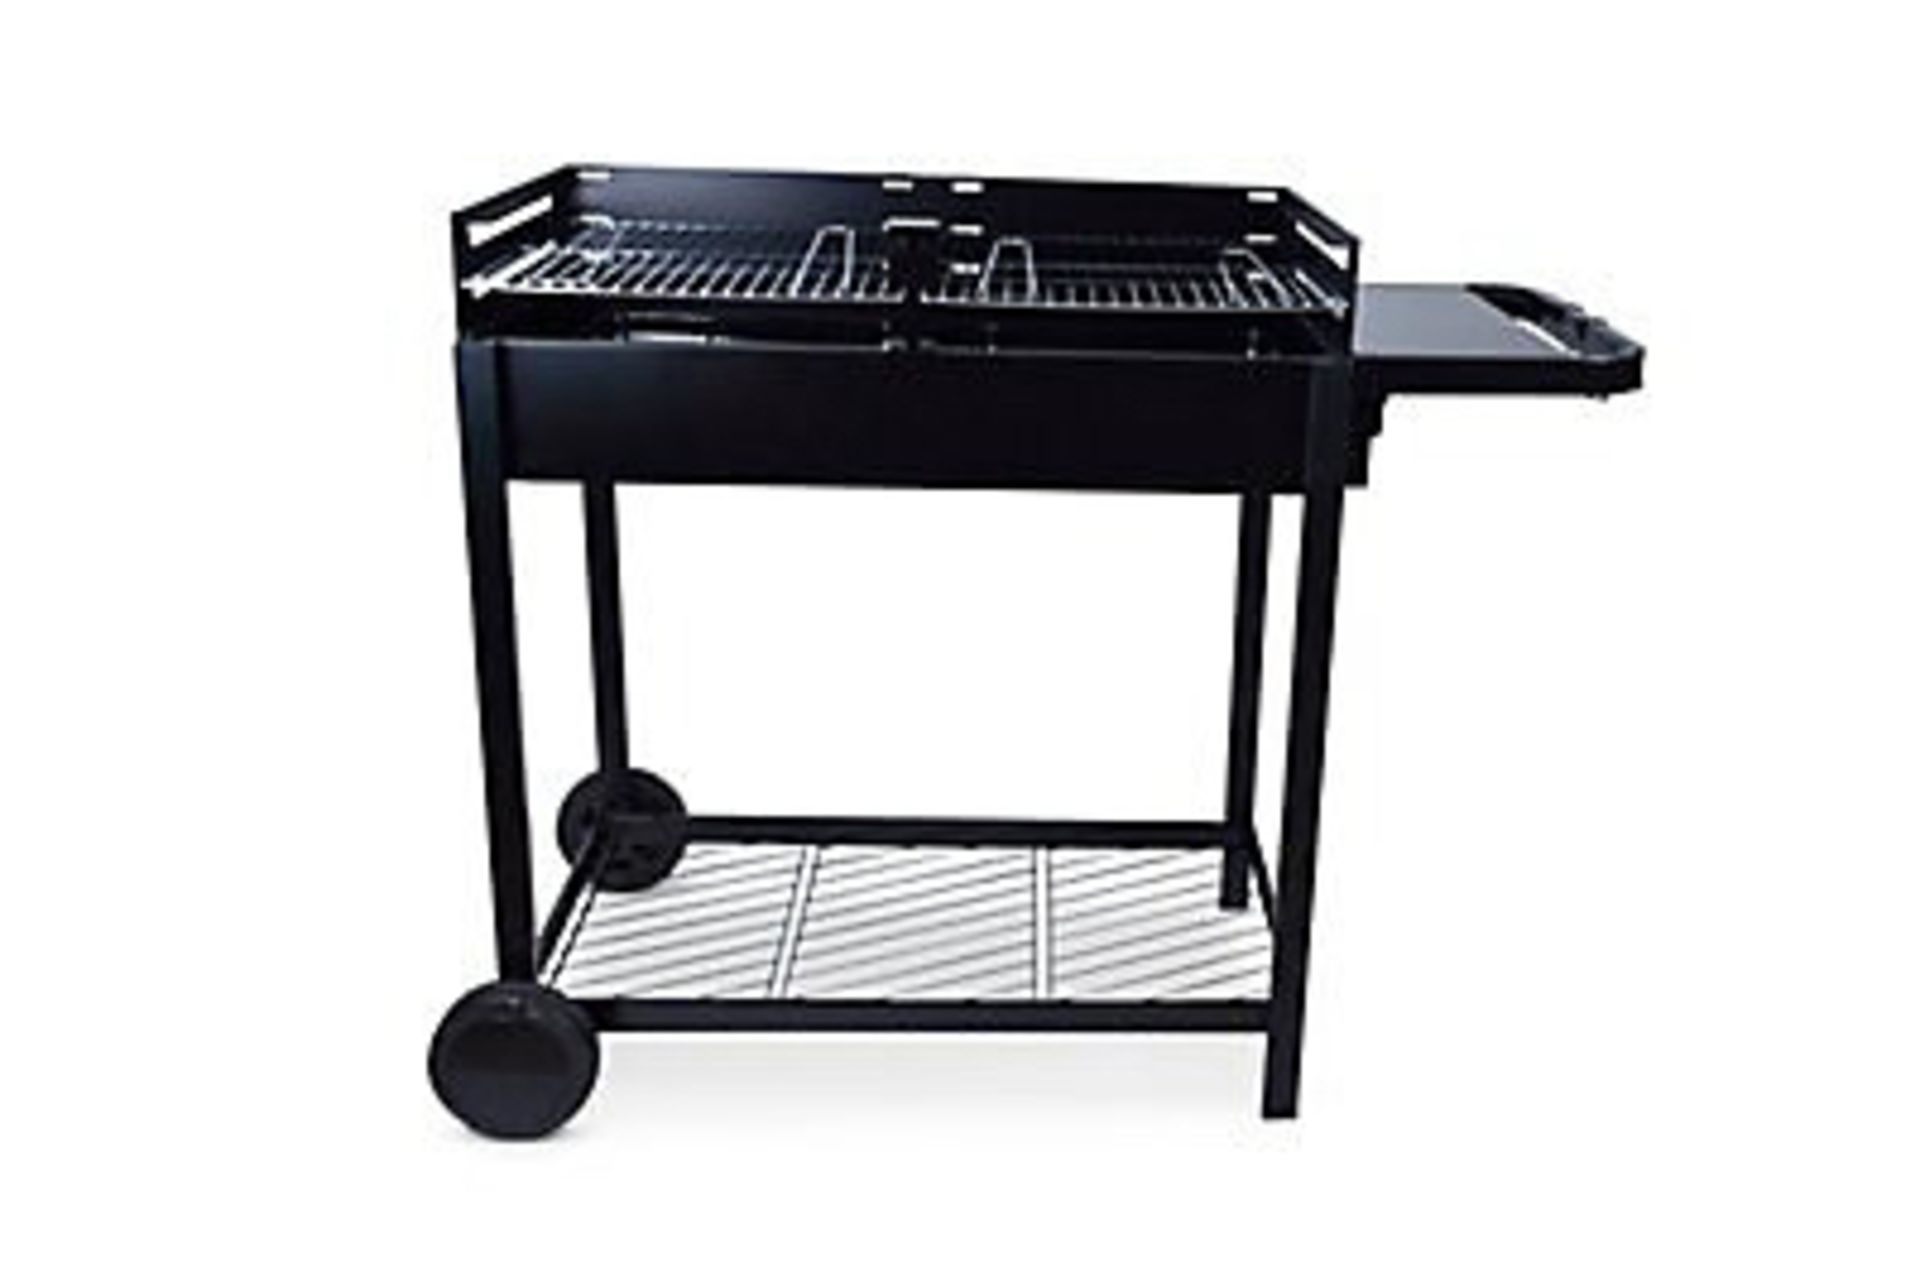 Zelfo BBQ Barbecue Grill with Stands - Brand New & Boxed - Image 3 of 7